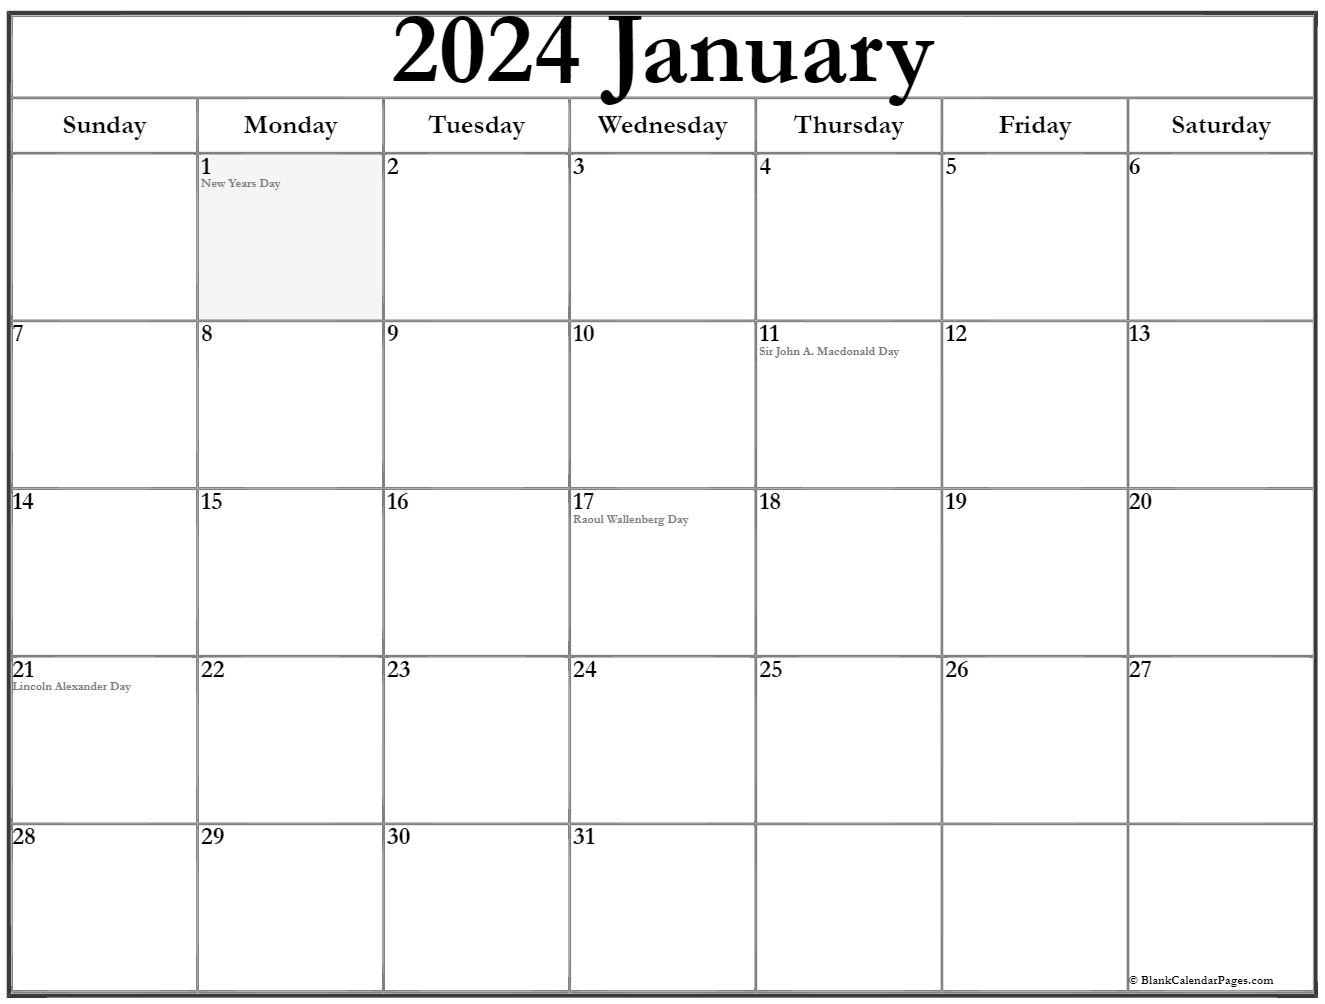 january-calendar-of-2024-cool-amazing-review-of-january-2024-calendar-blank